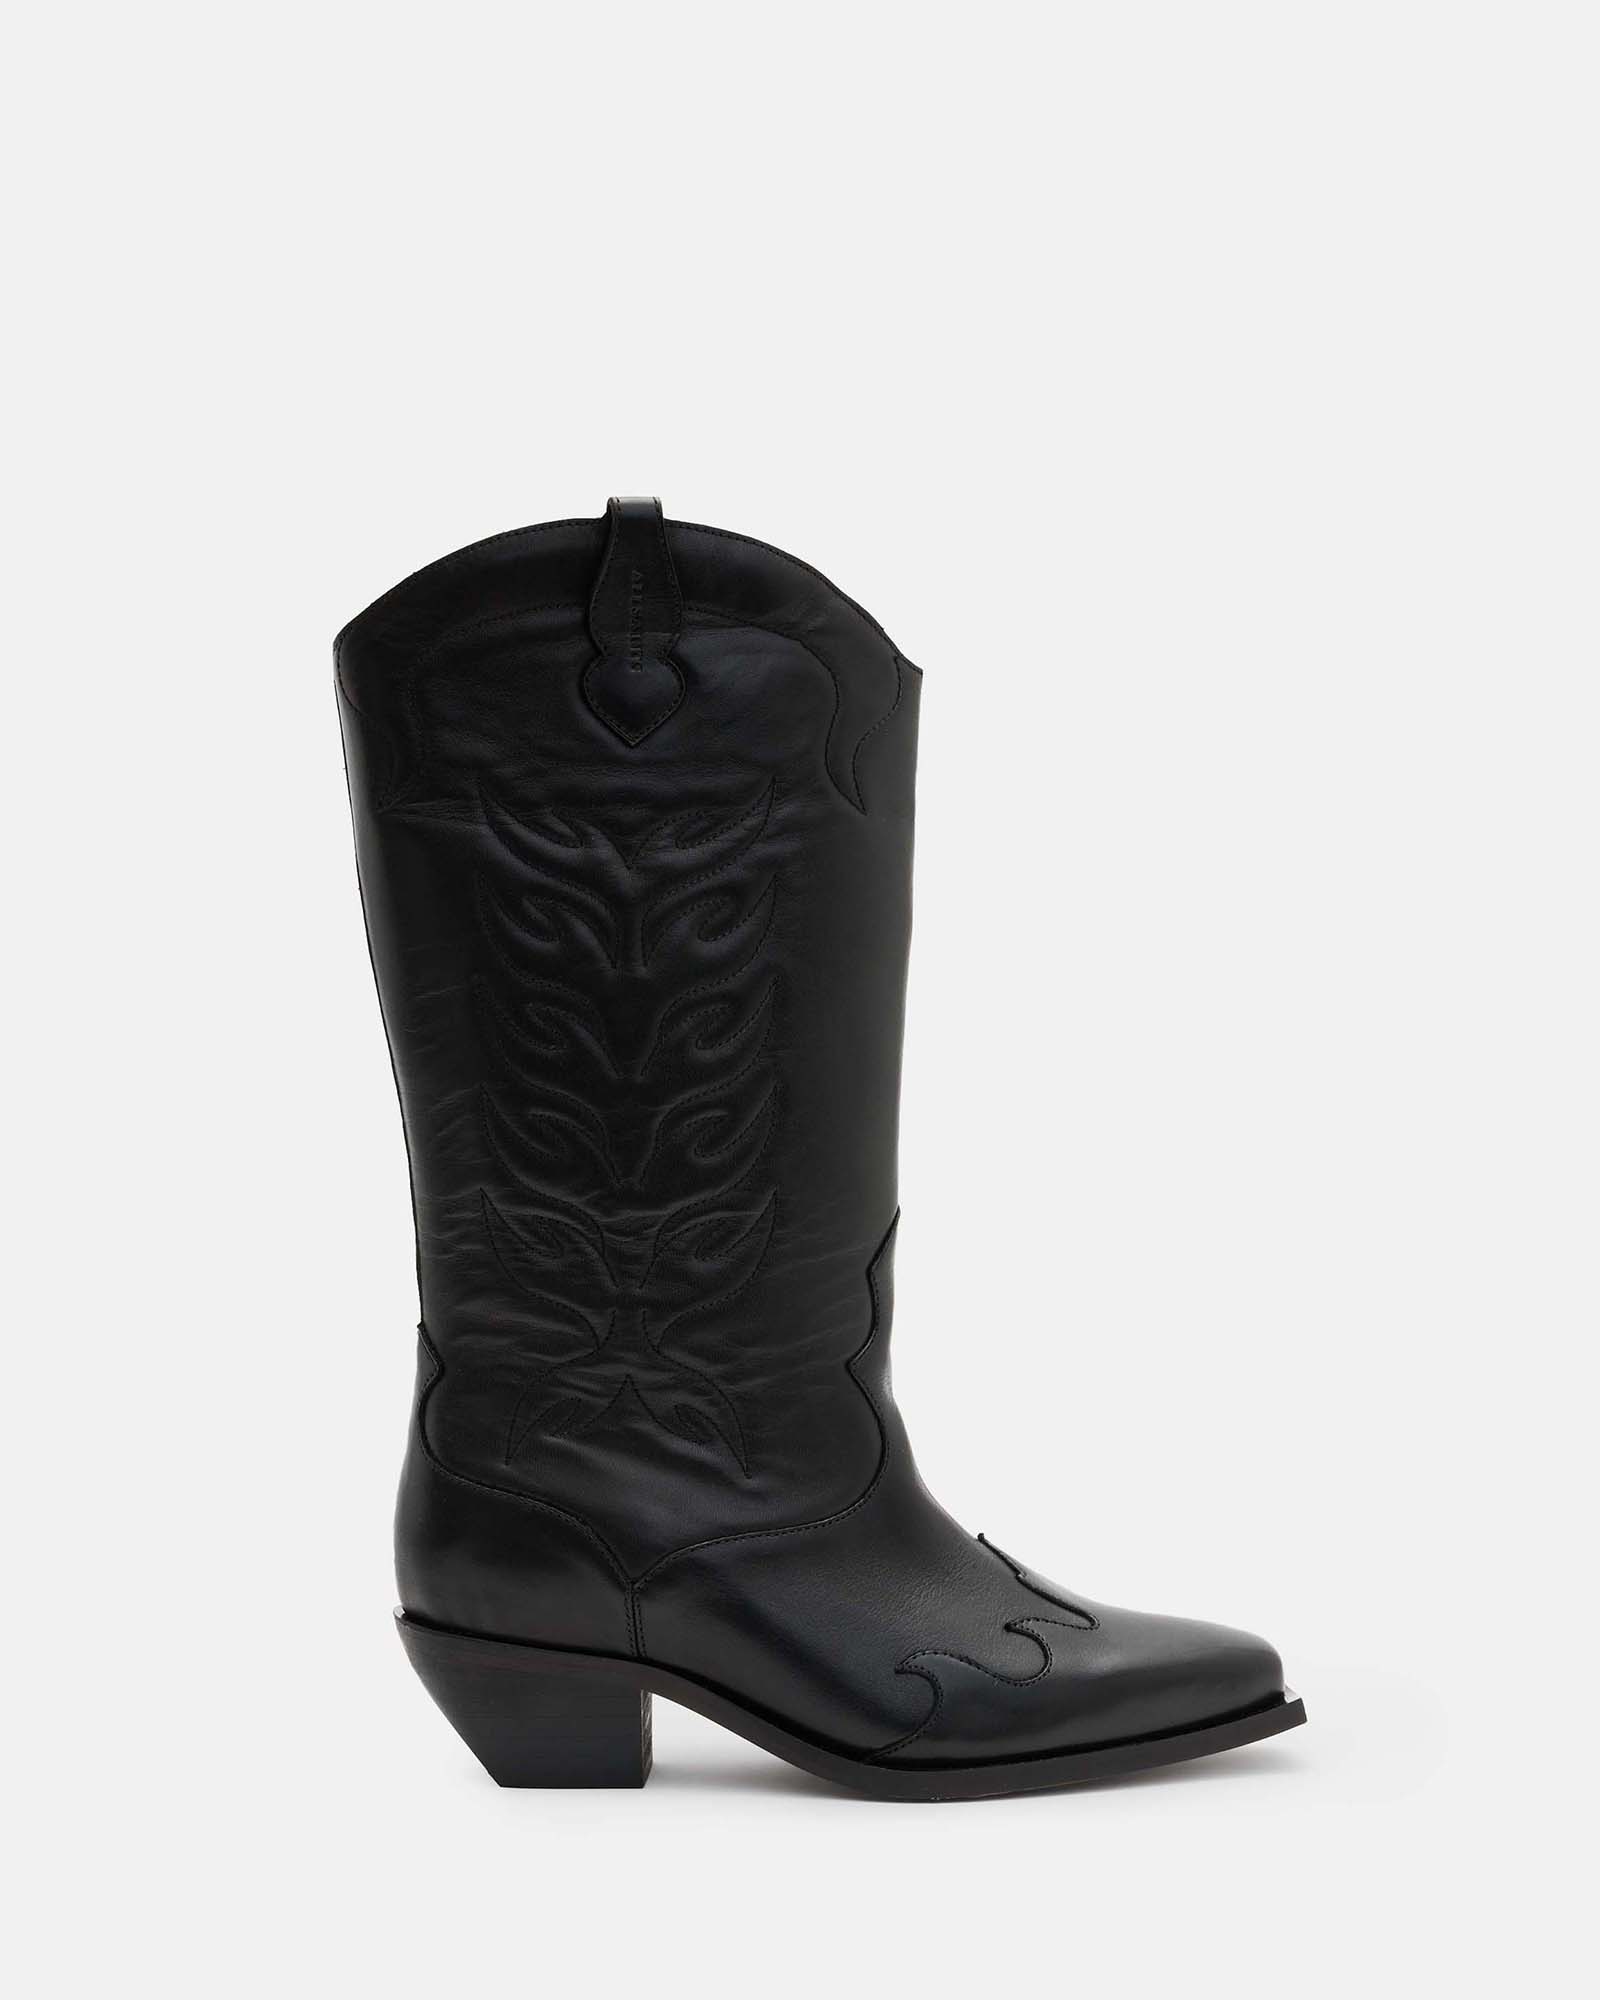 AllSaints Dolly Western Leather Boots,, Black